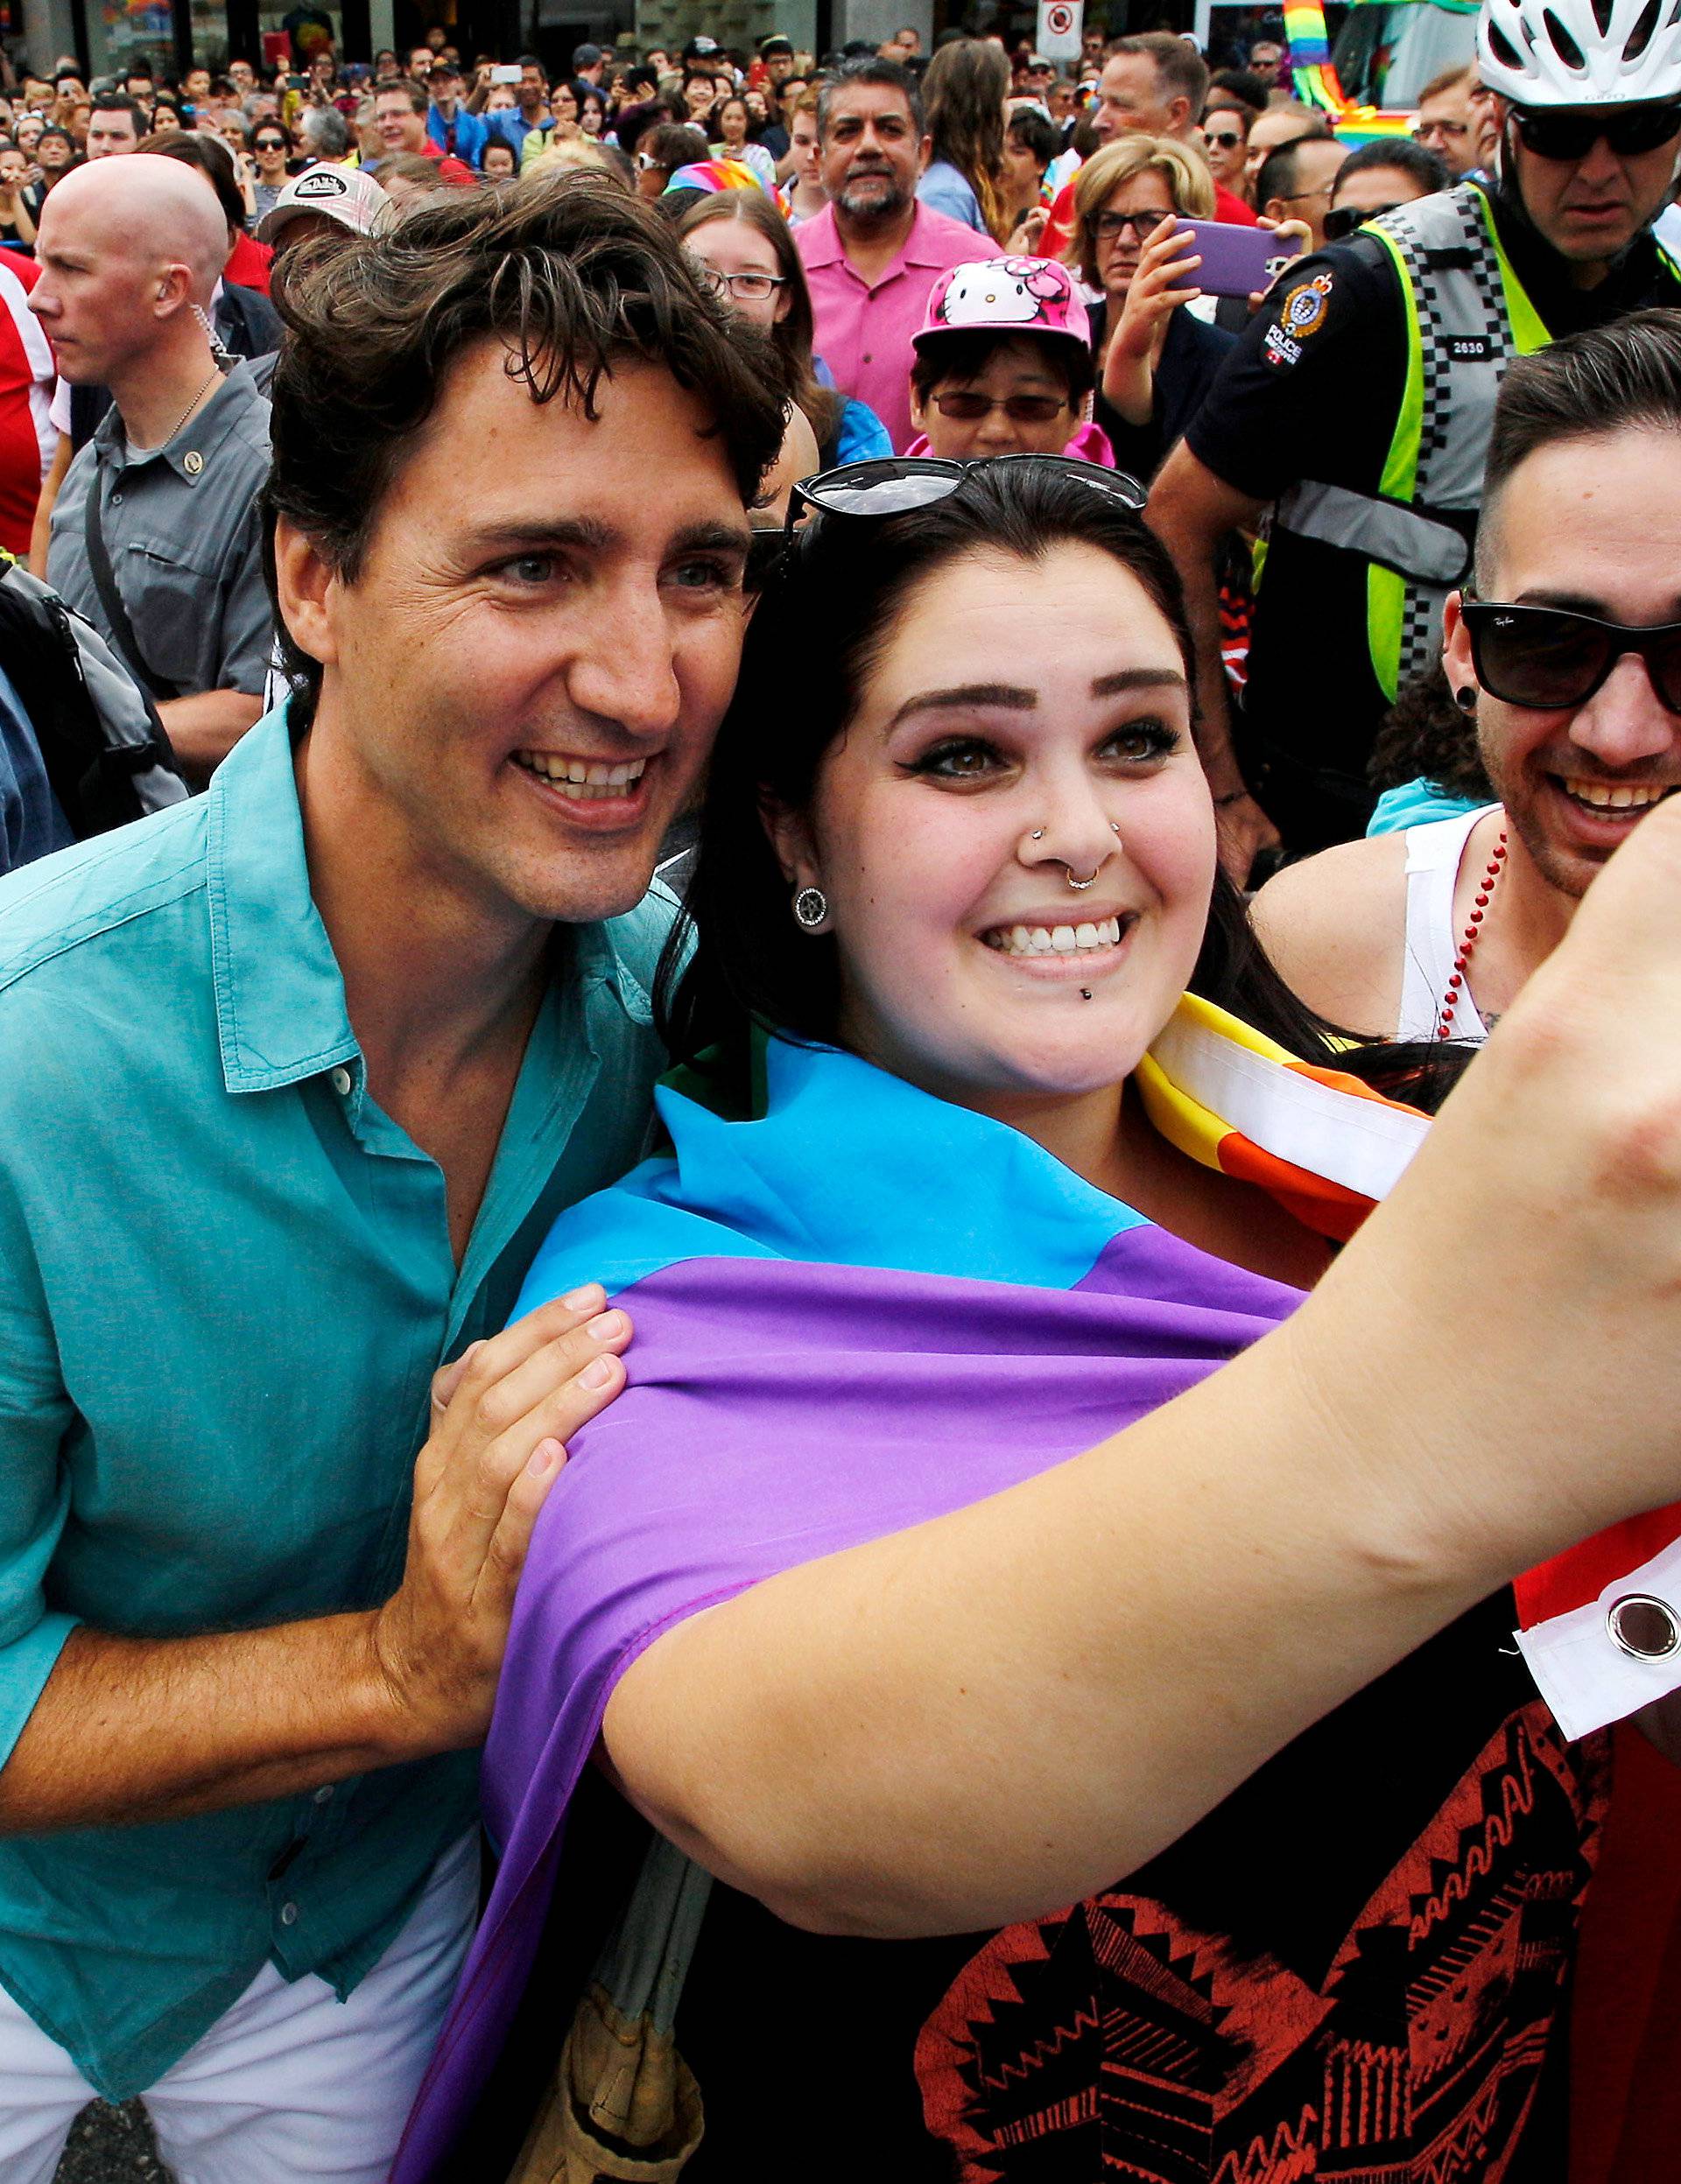 Canada's Prime Minister Justin Trudeau takes a picture with a supporter while walking in the Vancouver Pride Parade with his family